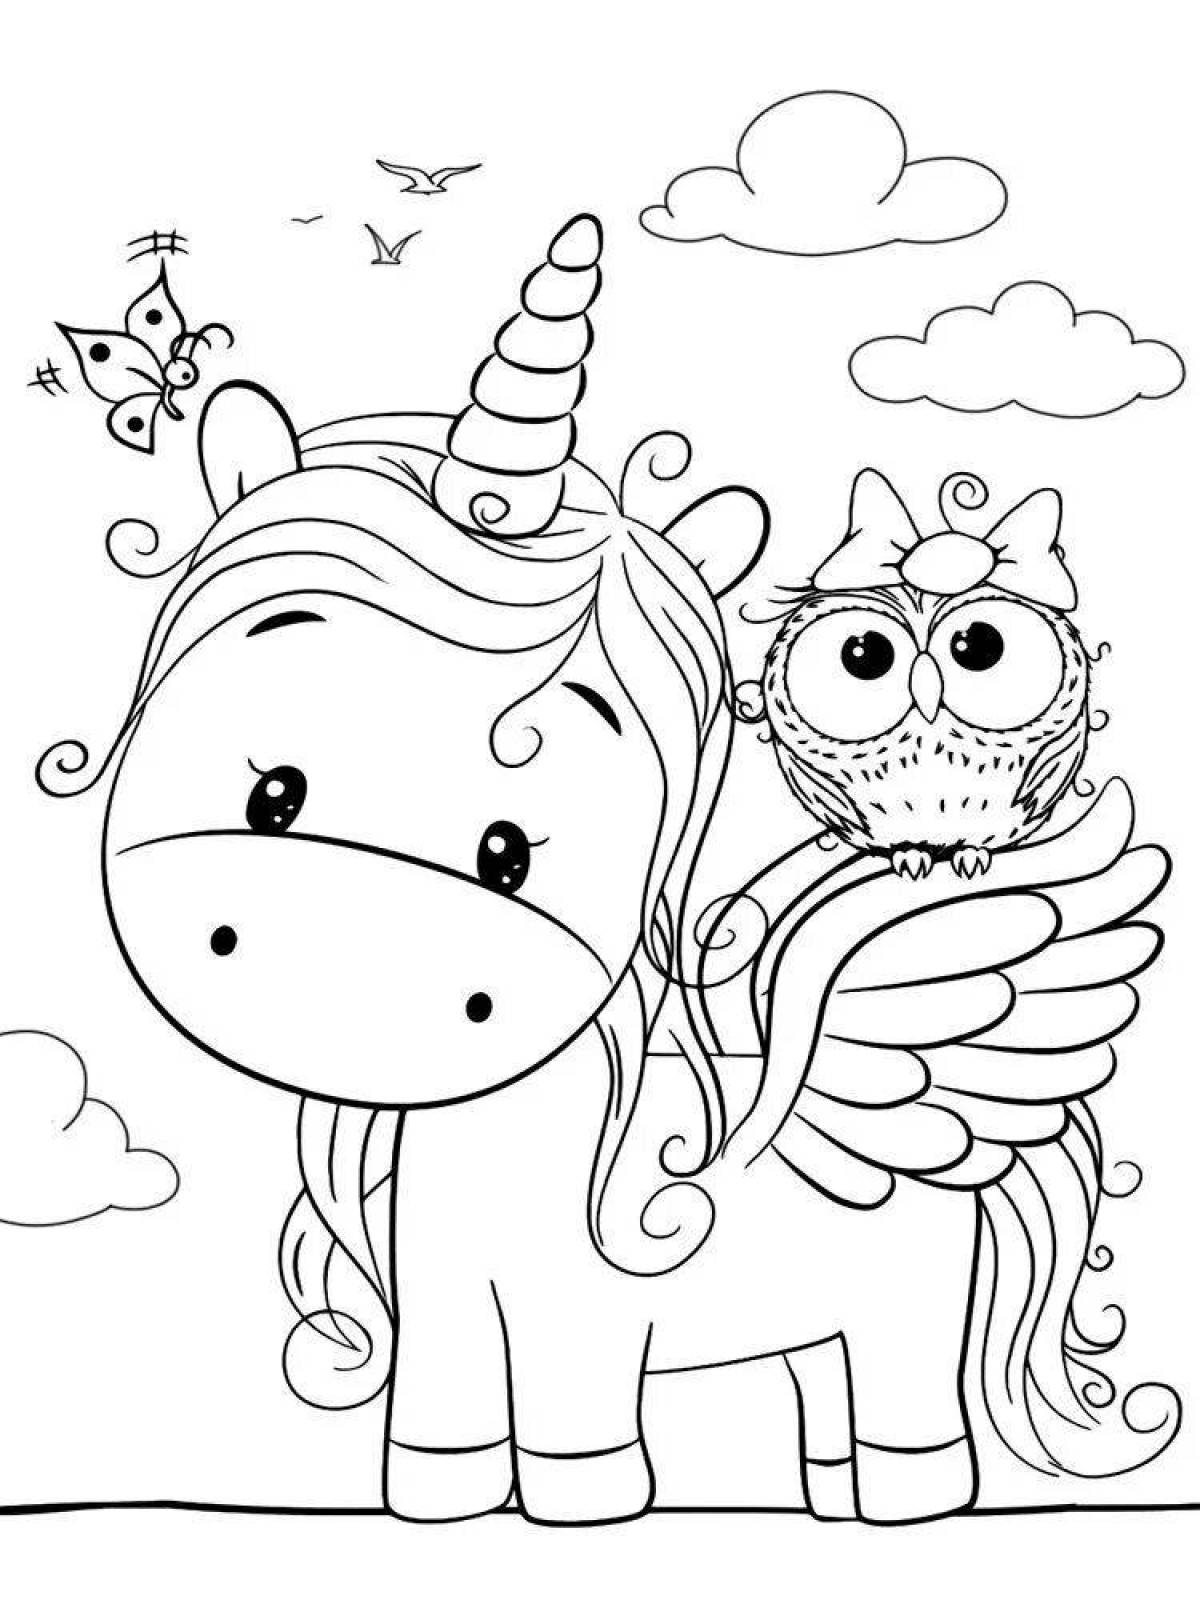 Coloring book with lights turn on unicorns